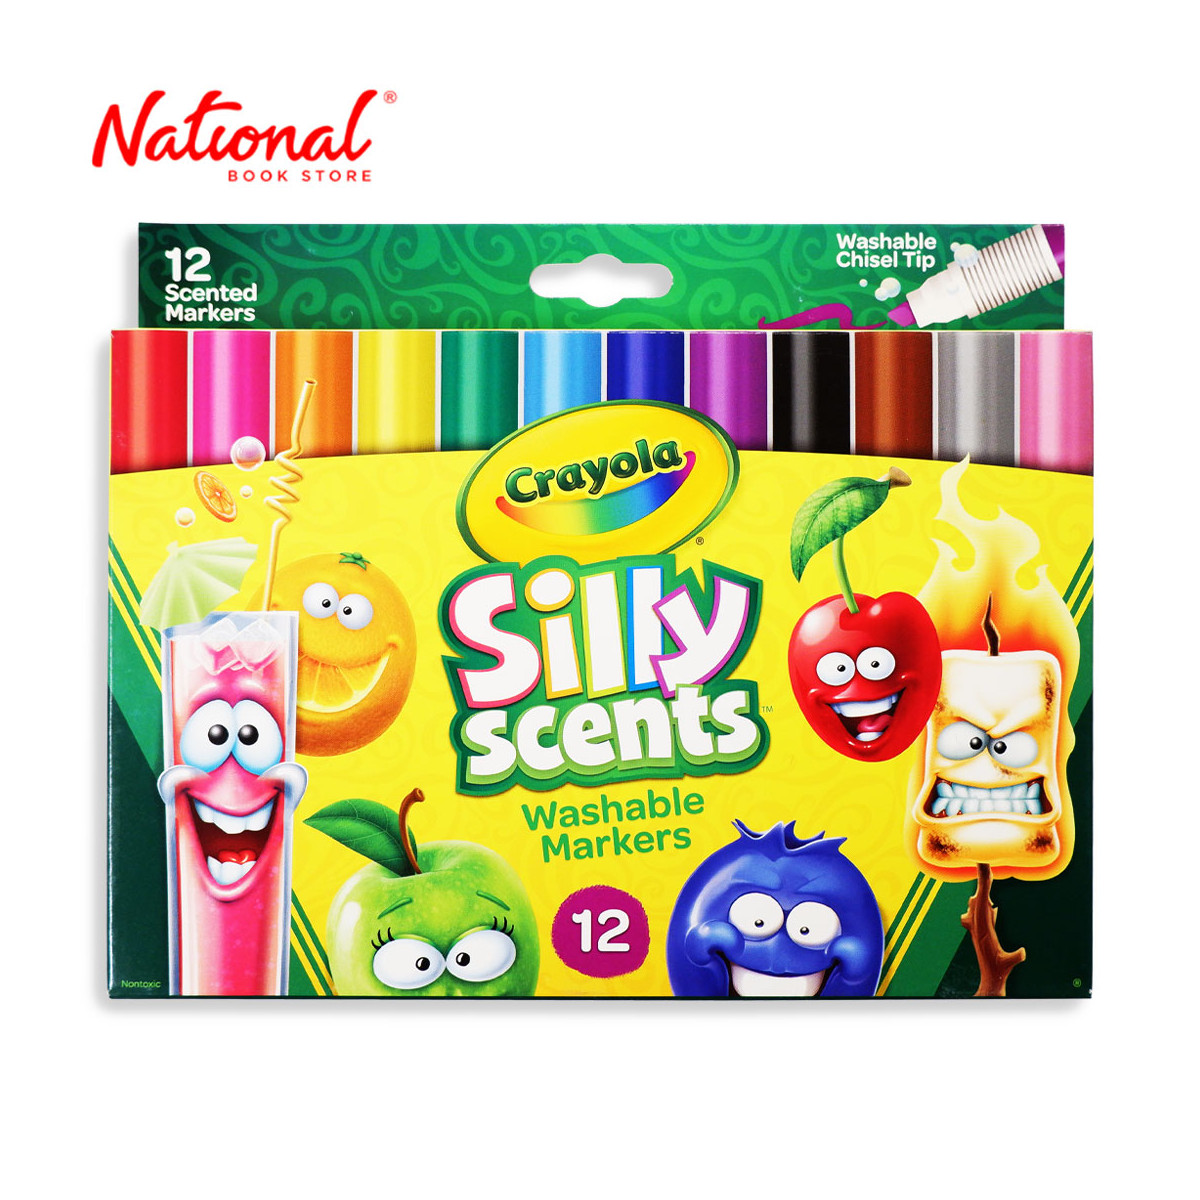 Crayola Silly Scents Washable Marker Set Of 12 588199 Chisel Tip - Arts & Crafts Supplies